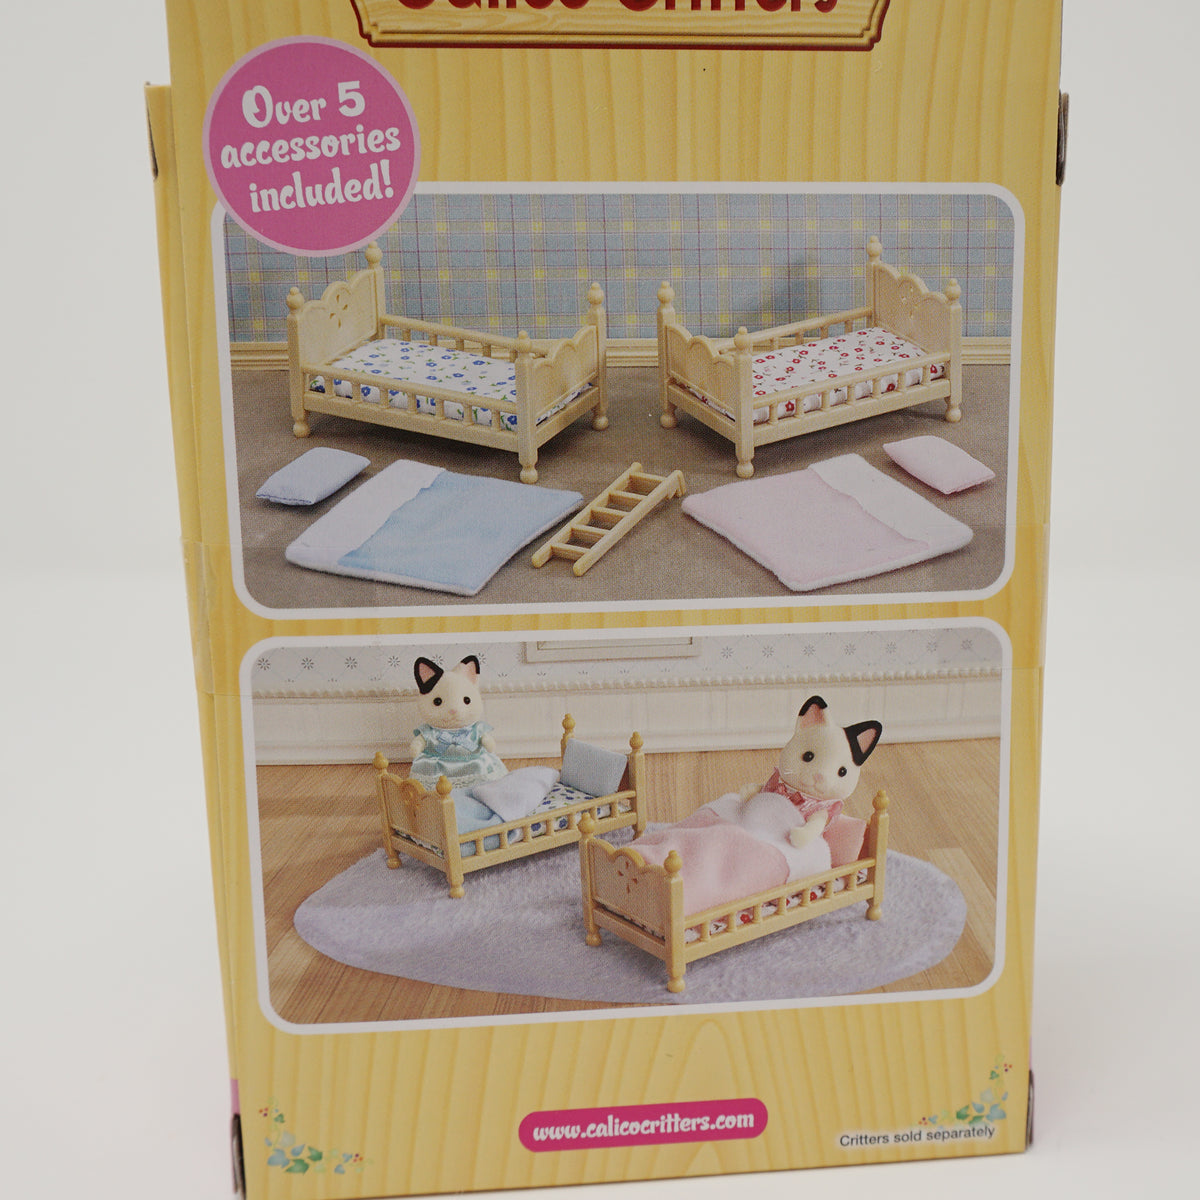 New Sylvanian Families doll Baby Bunk bed Set / Calico Critters